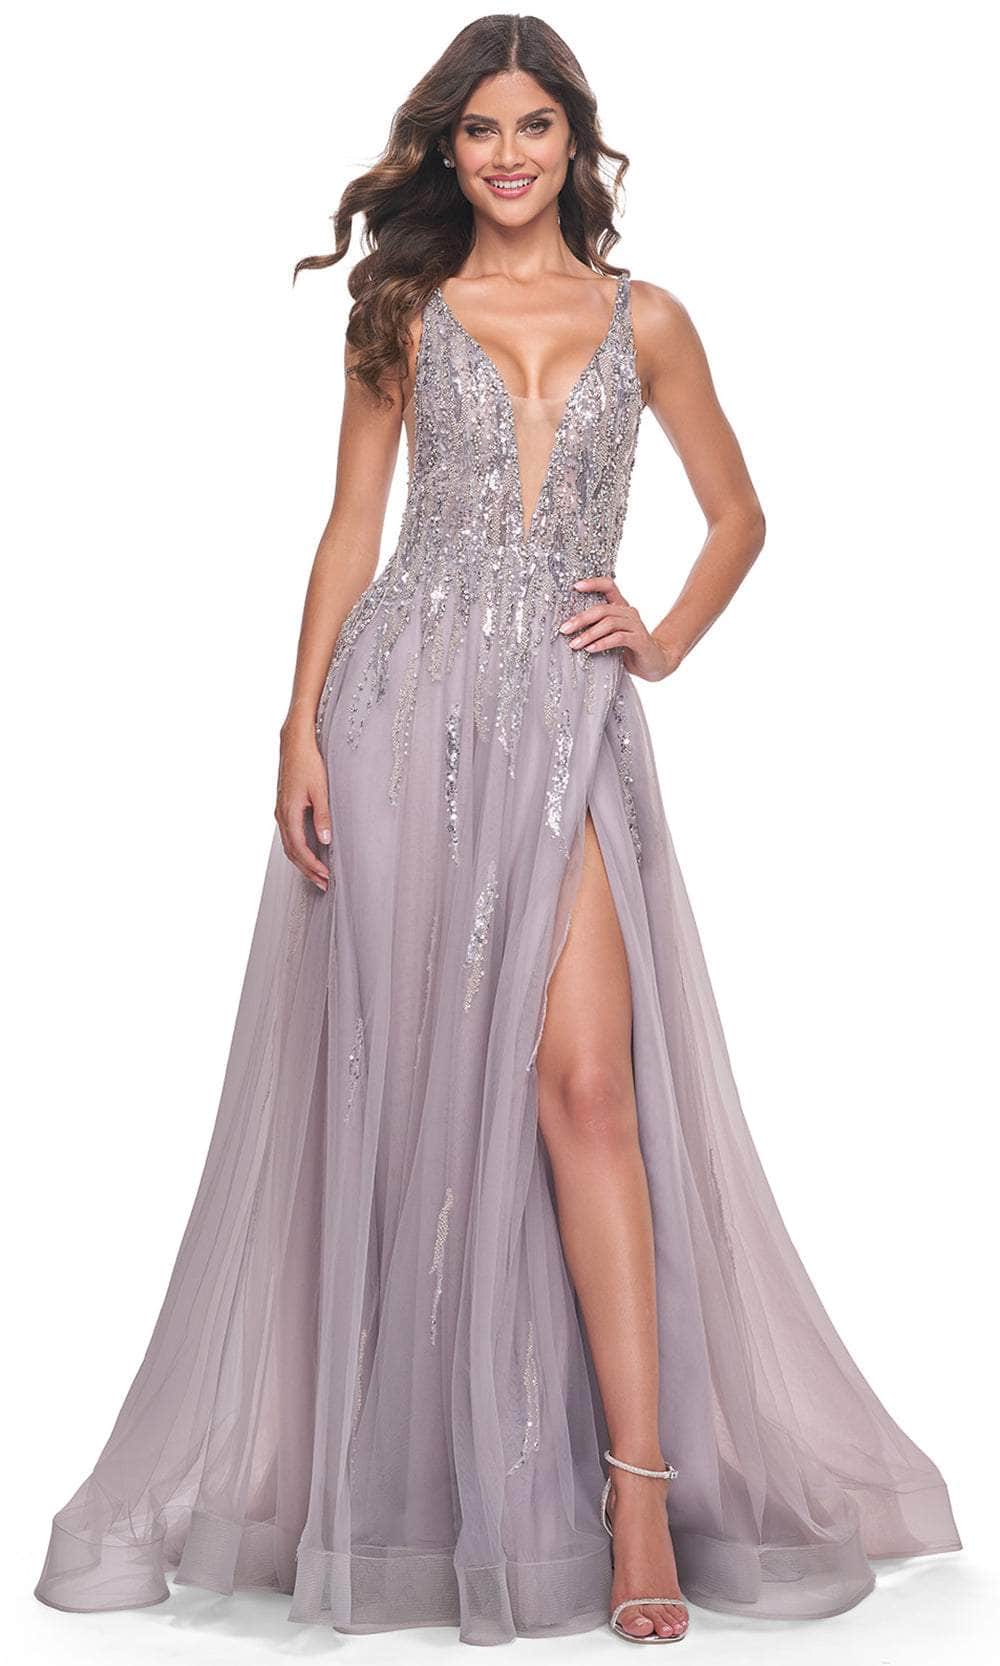 La Femme 31995 - Sequined Sleeveless Prom Gown Evening Dresses 00 /  Dusty Mauve